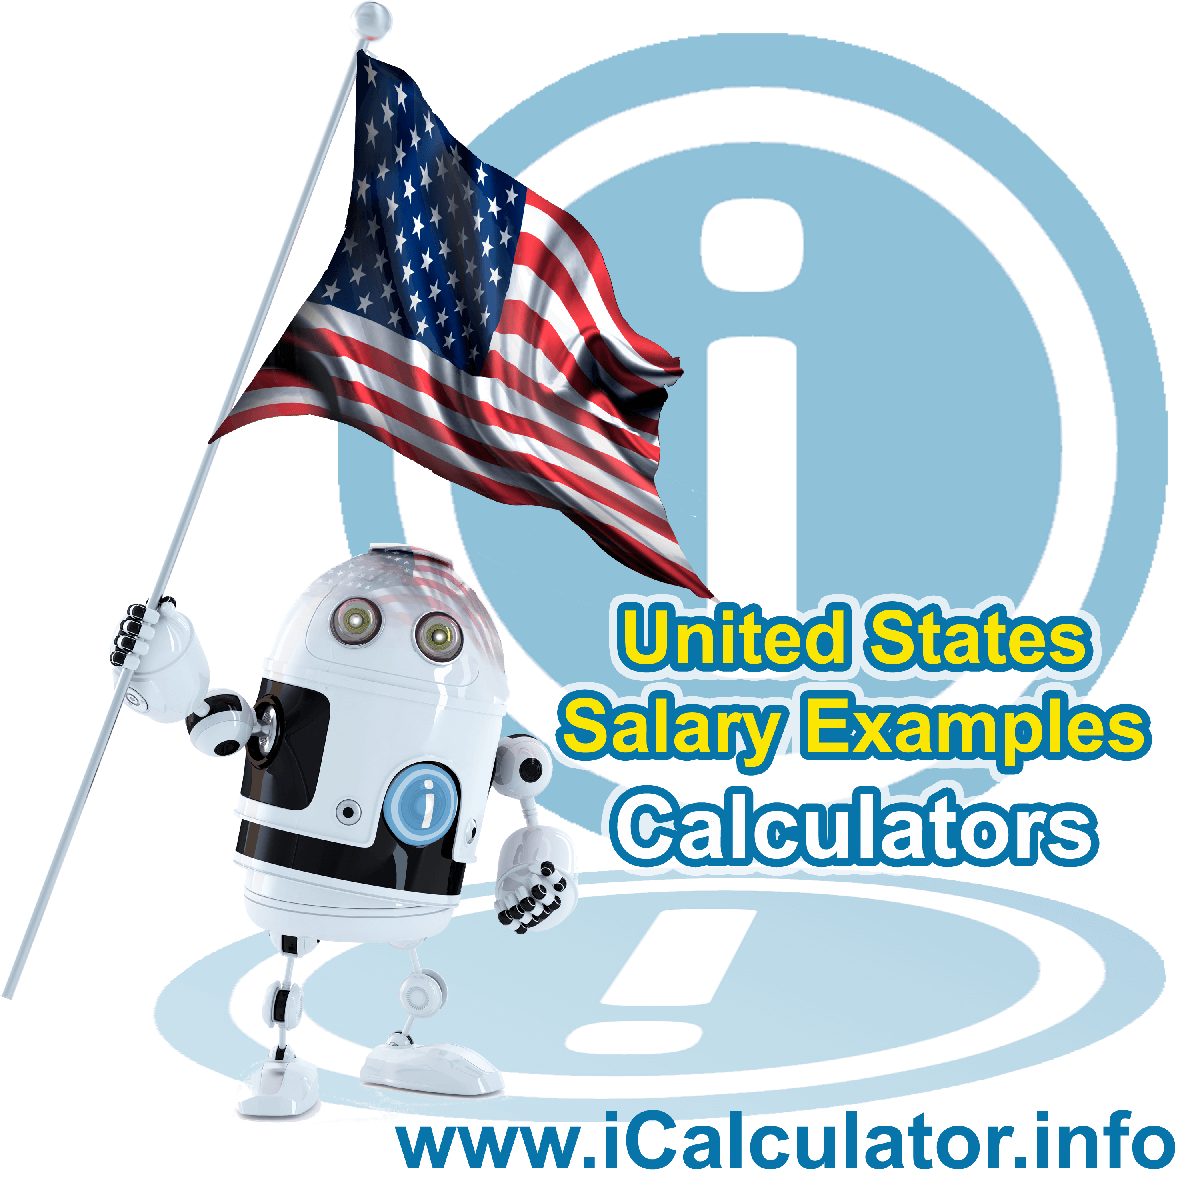 US Salary examples featuring federal tax return calculations, state tax return calculations, how to calculate mdicare, pensions and other tax credit elements which form part of the annual tax return